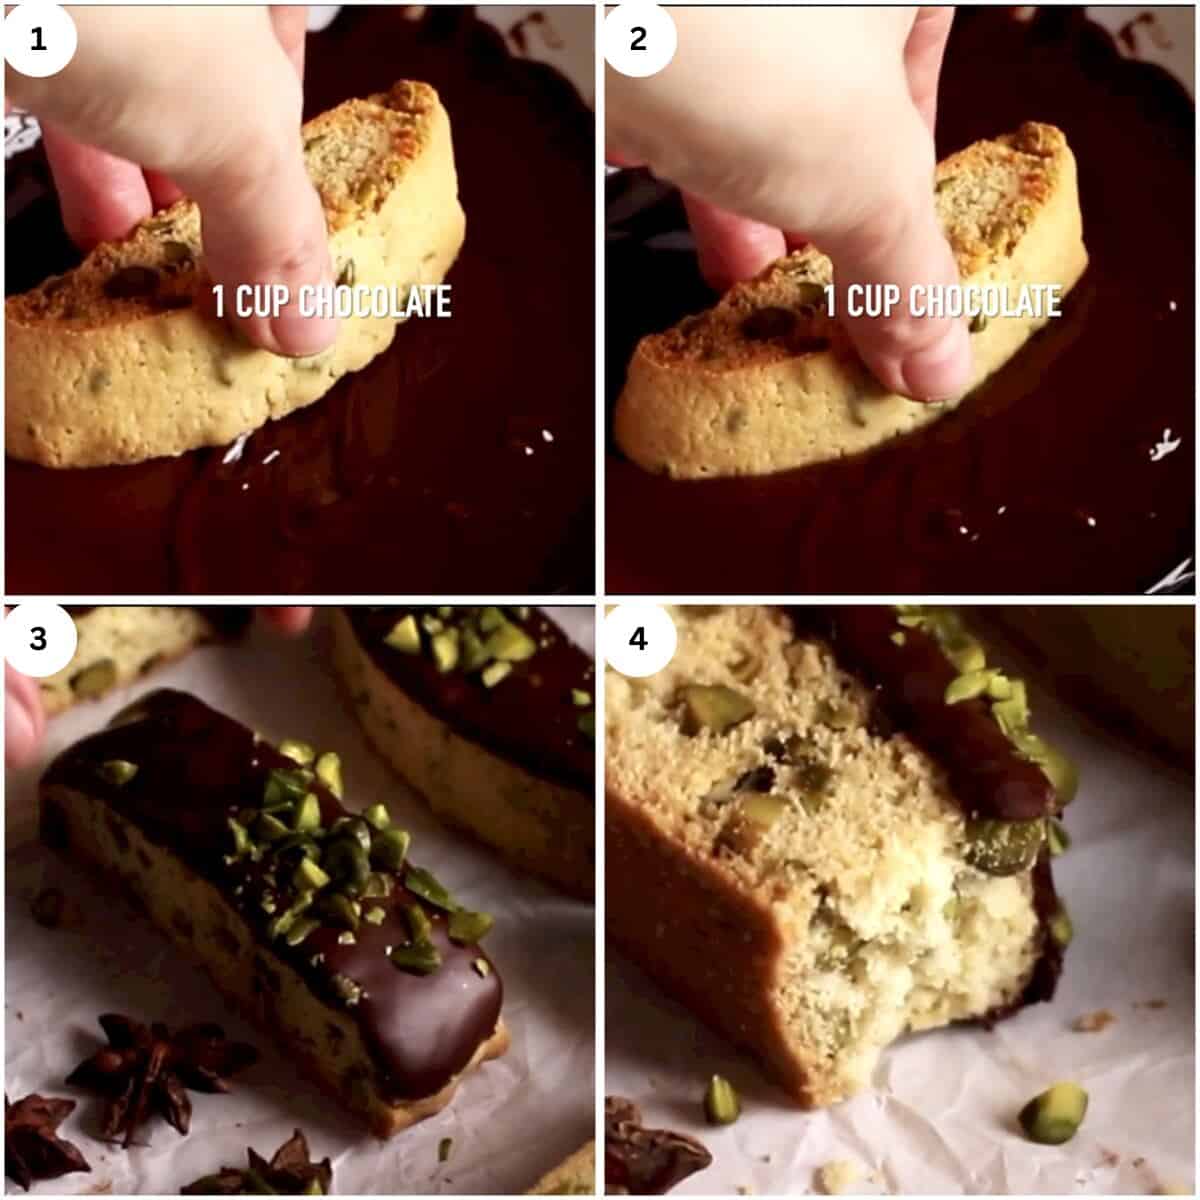 dipping biscotti slices in chocolate